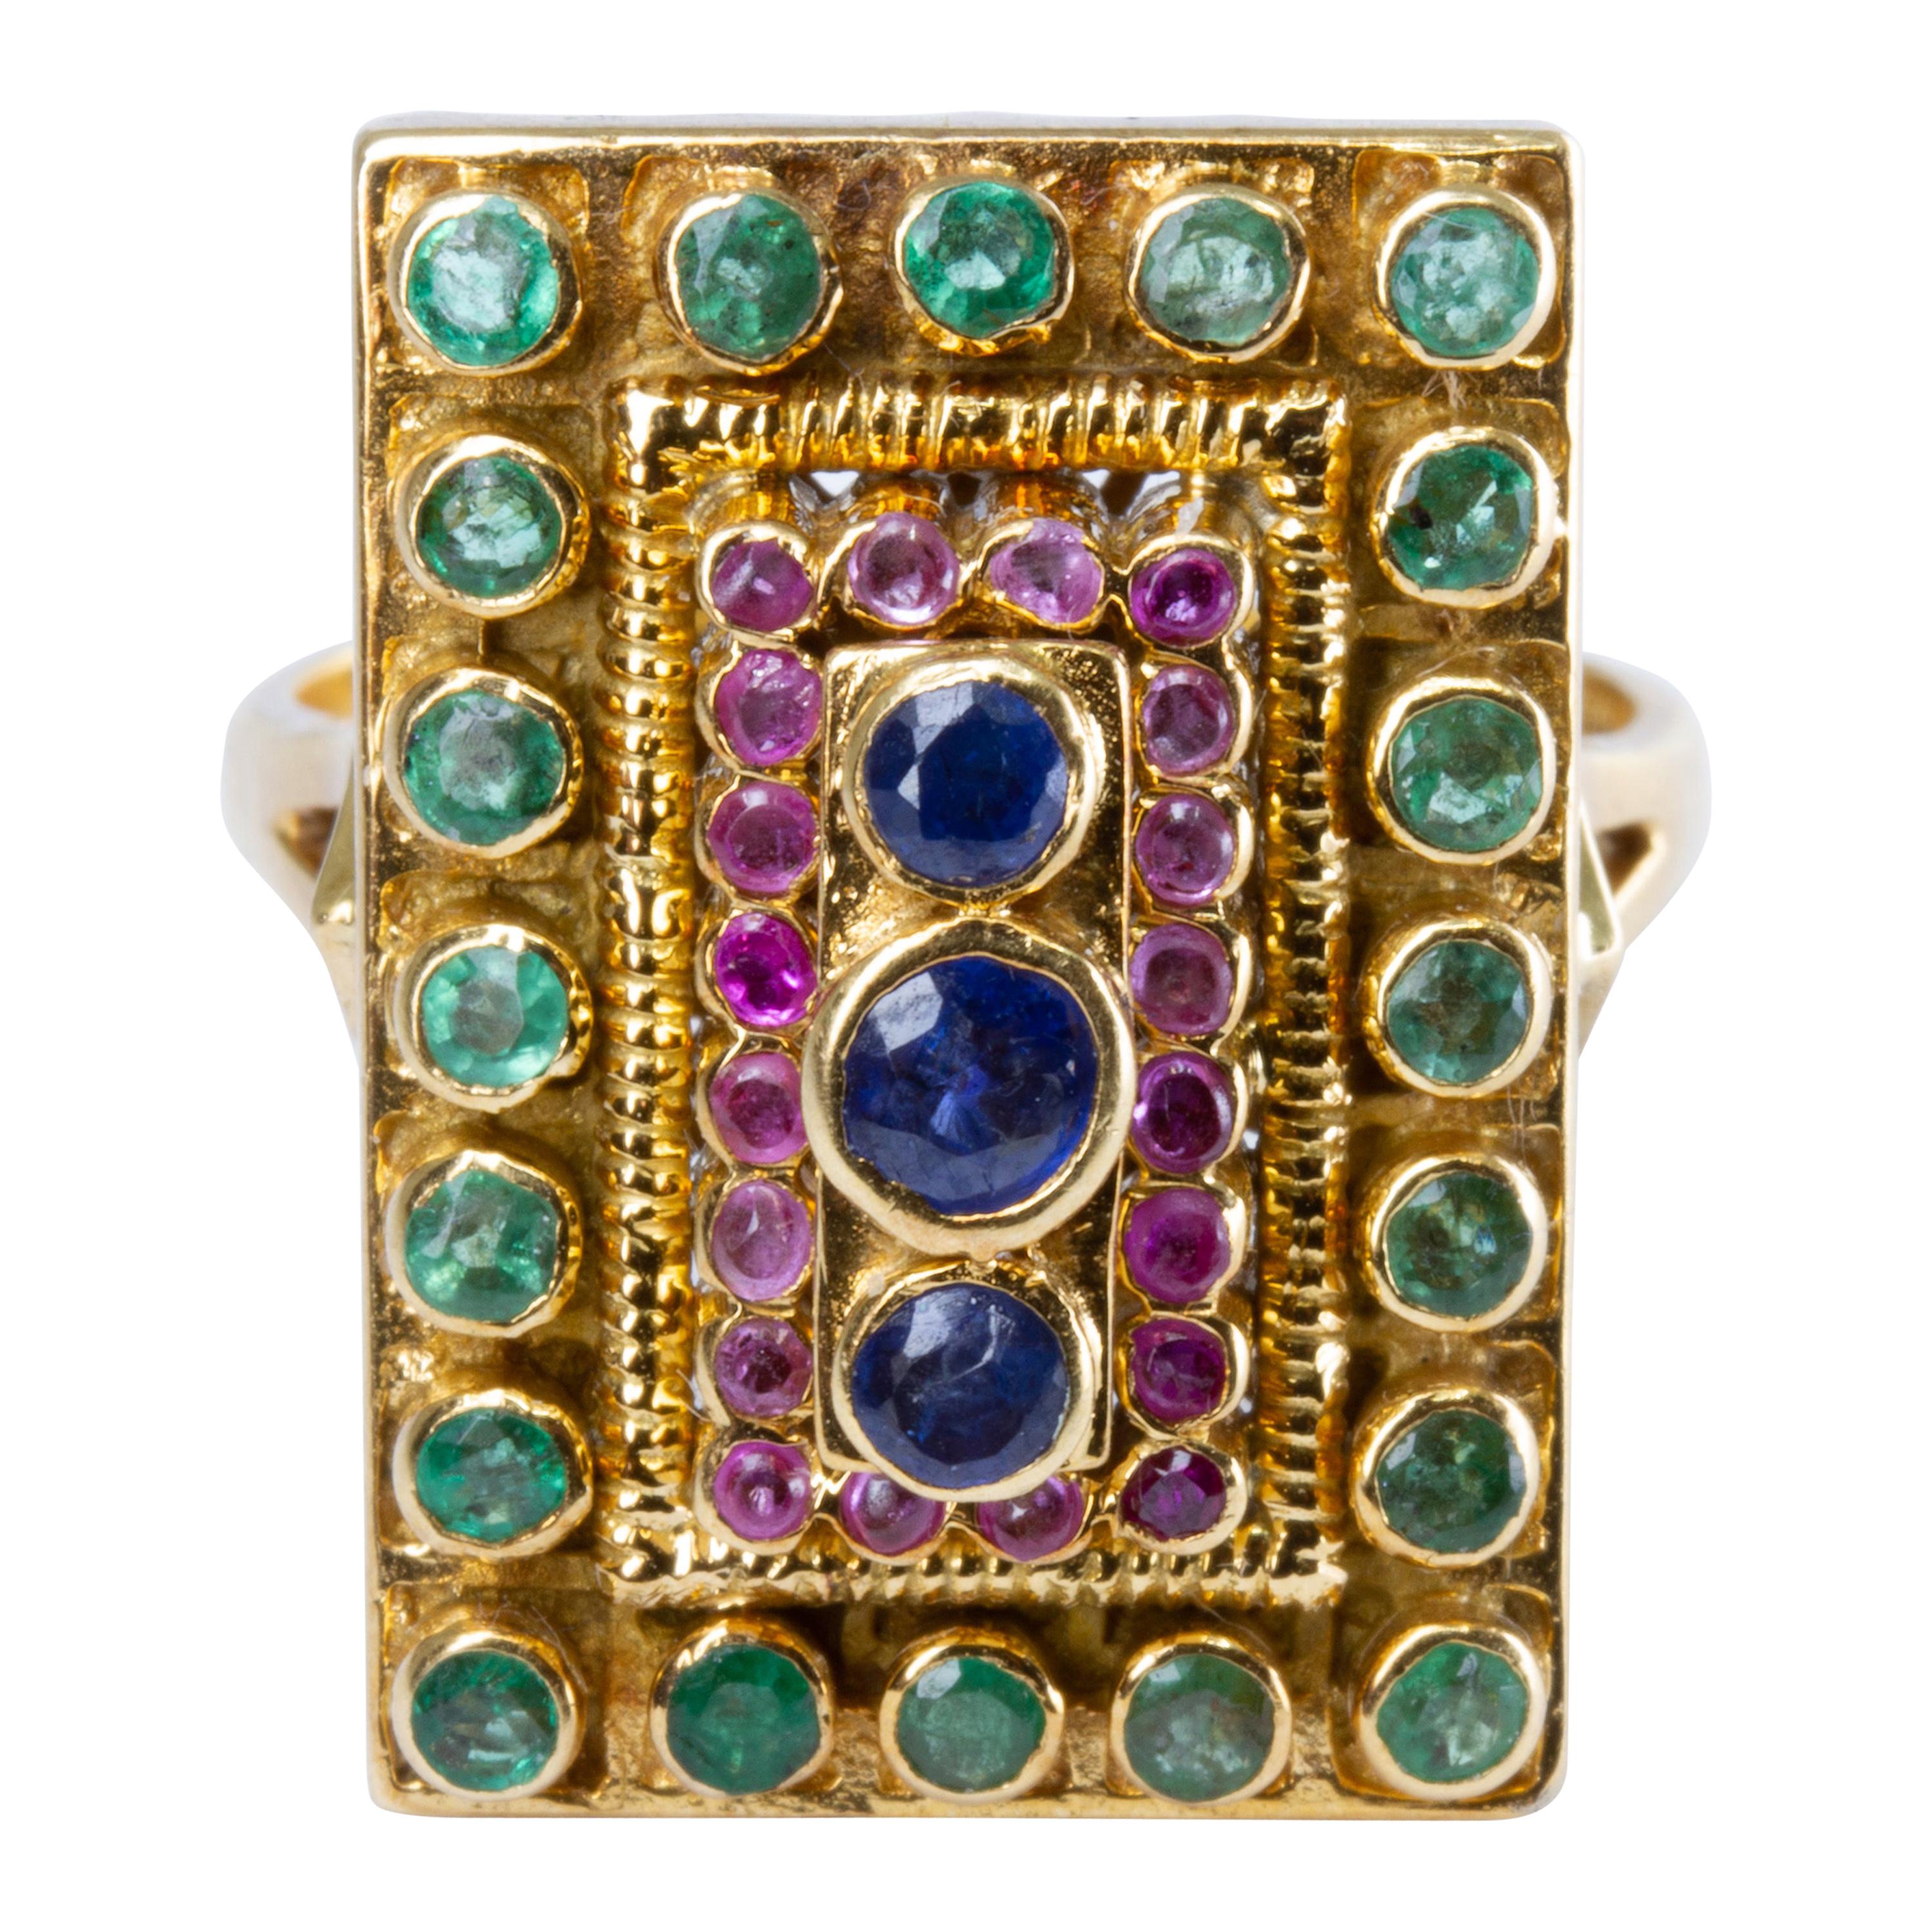 Ilias Lalaounis 18 Karat Gold, Sapphire, Ruby and Emerald Ring